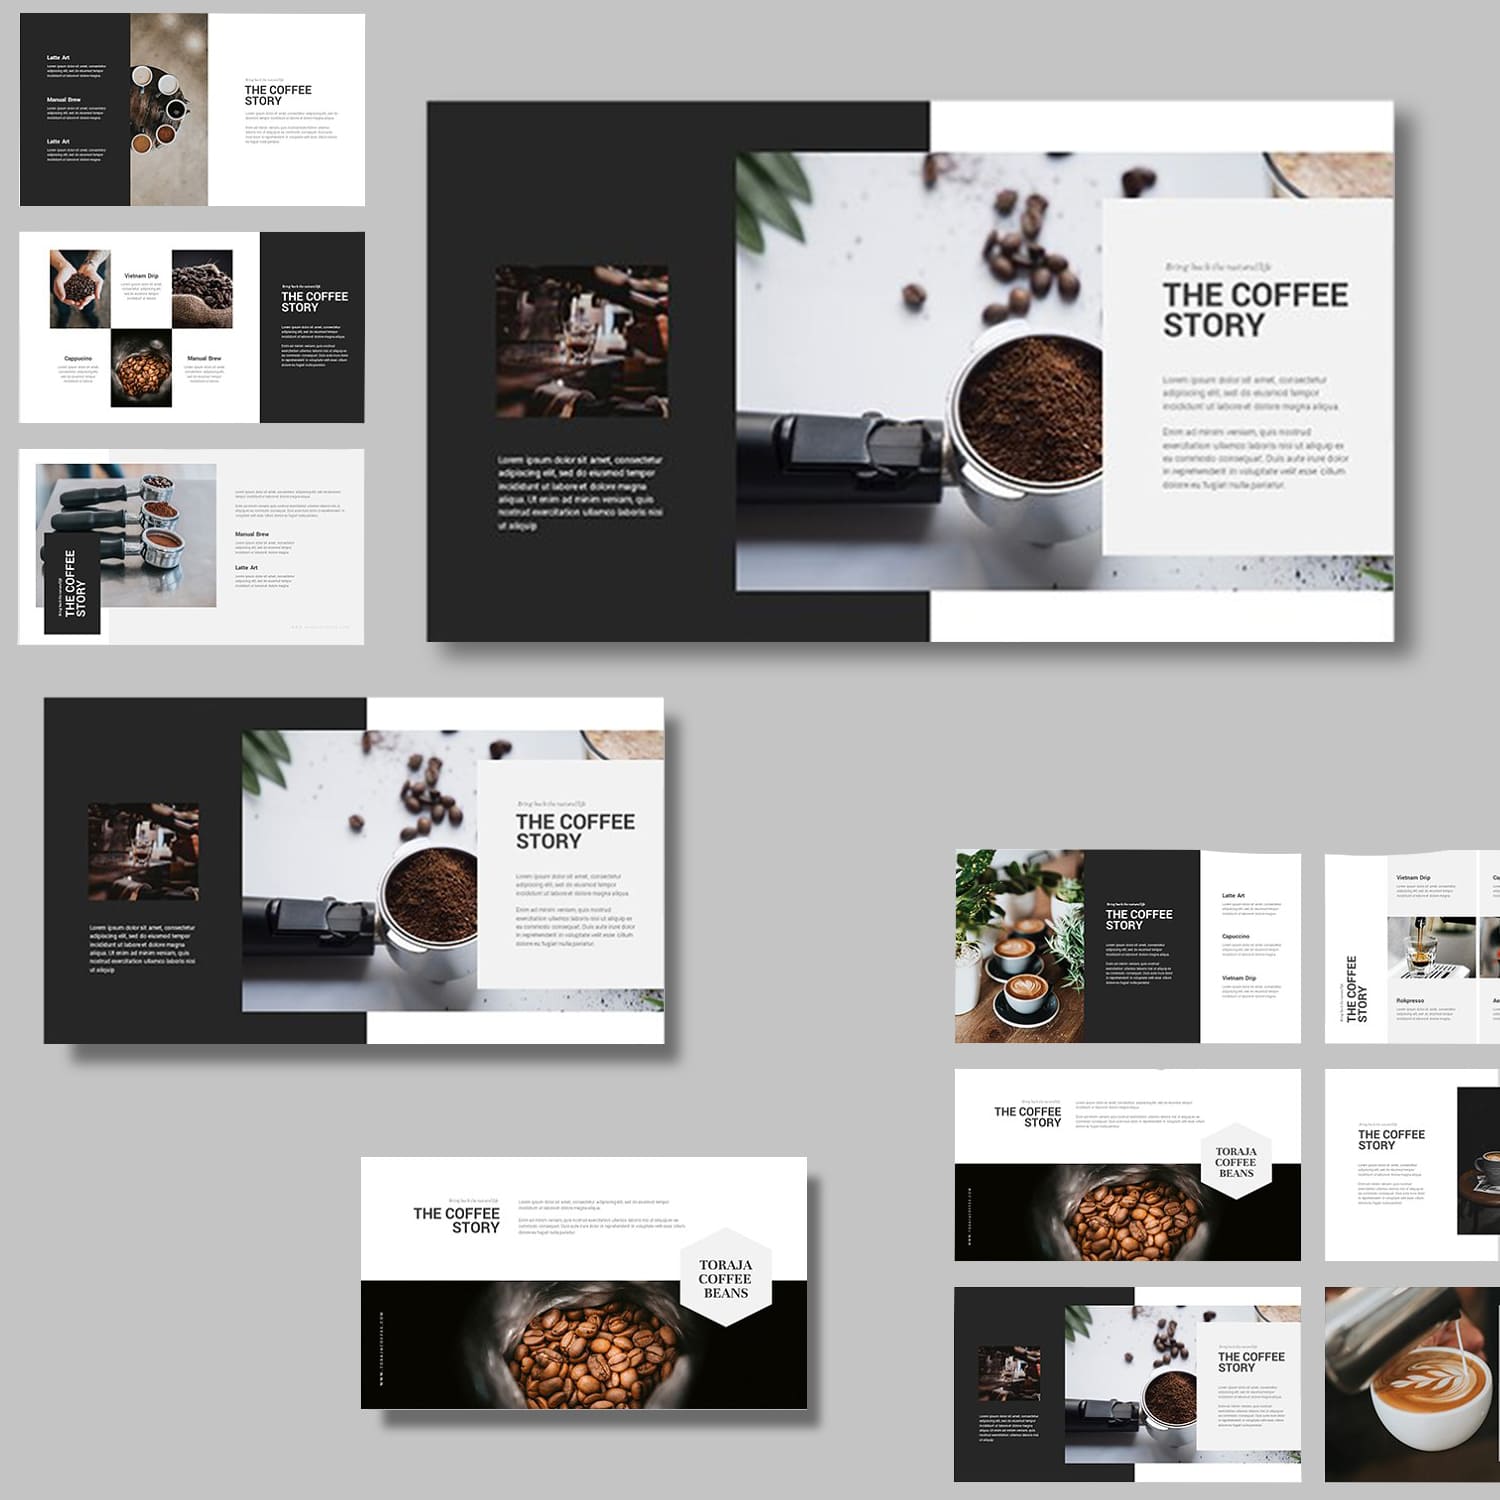 This Presentation can be used for any type of presentation: Portfolio, Company Profile, Multipurpose, Creative Agency, and also can be used for Custom Production.